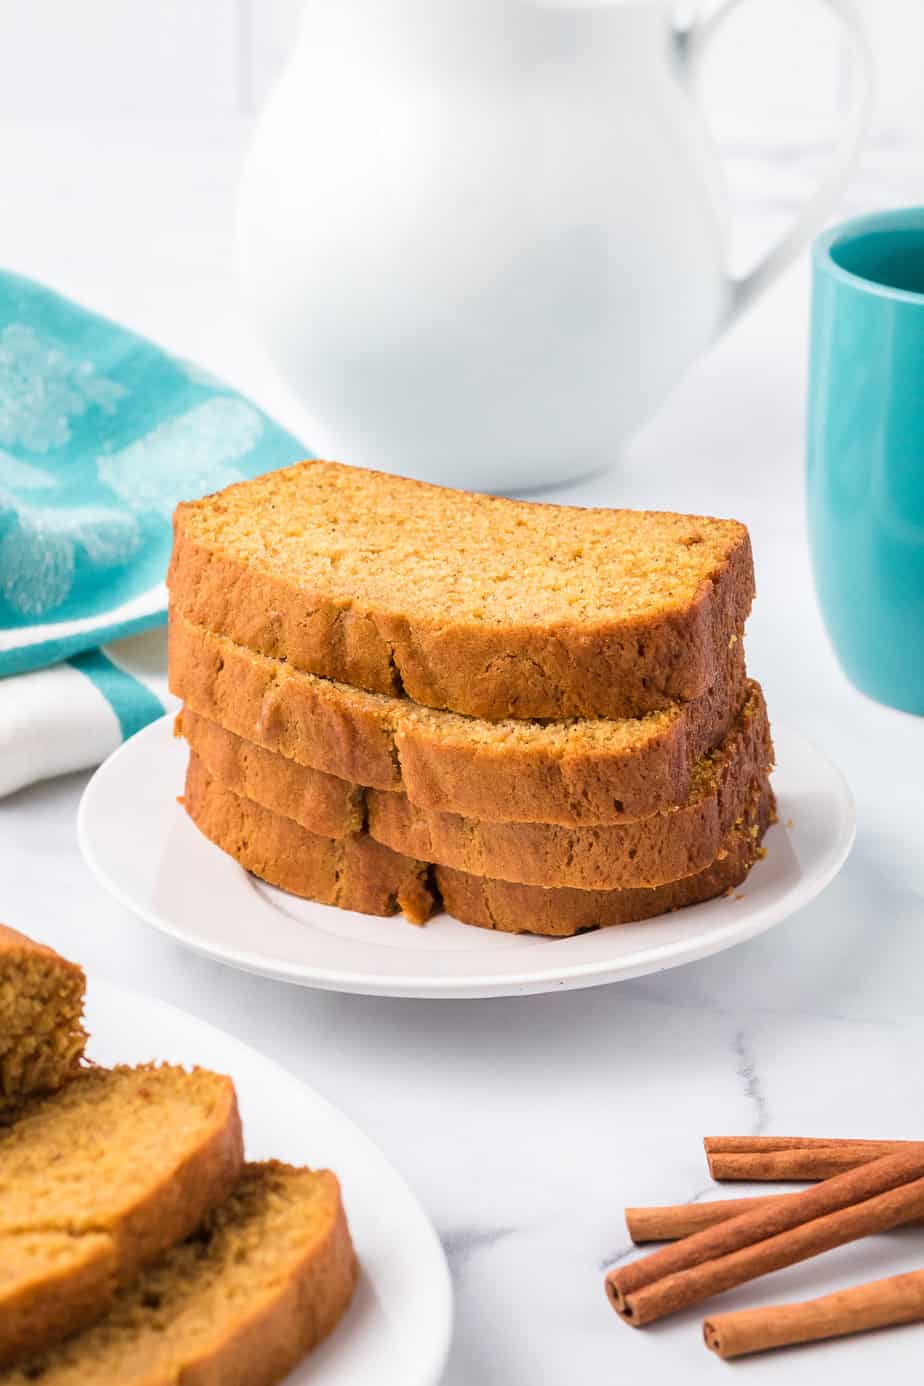 Pumpkin bread stacked on a plate on a counter from the side with a mug, pitcher, and more pumpkin bread on a platter along the edges.